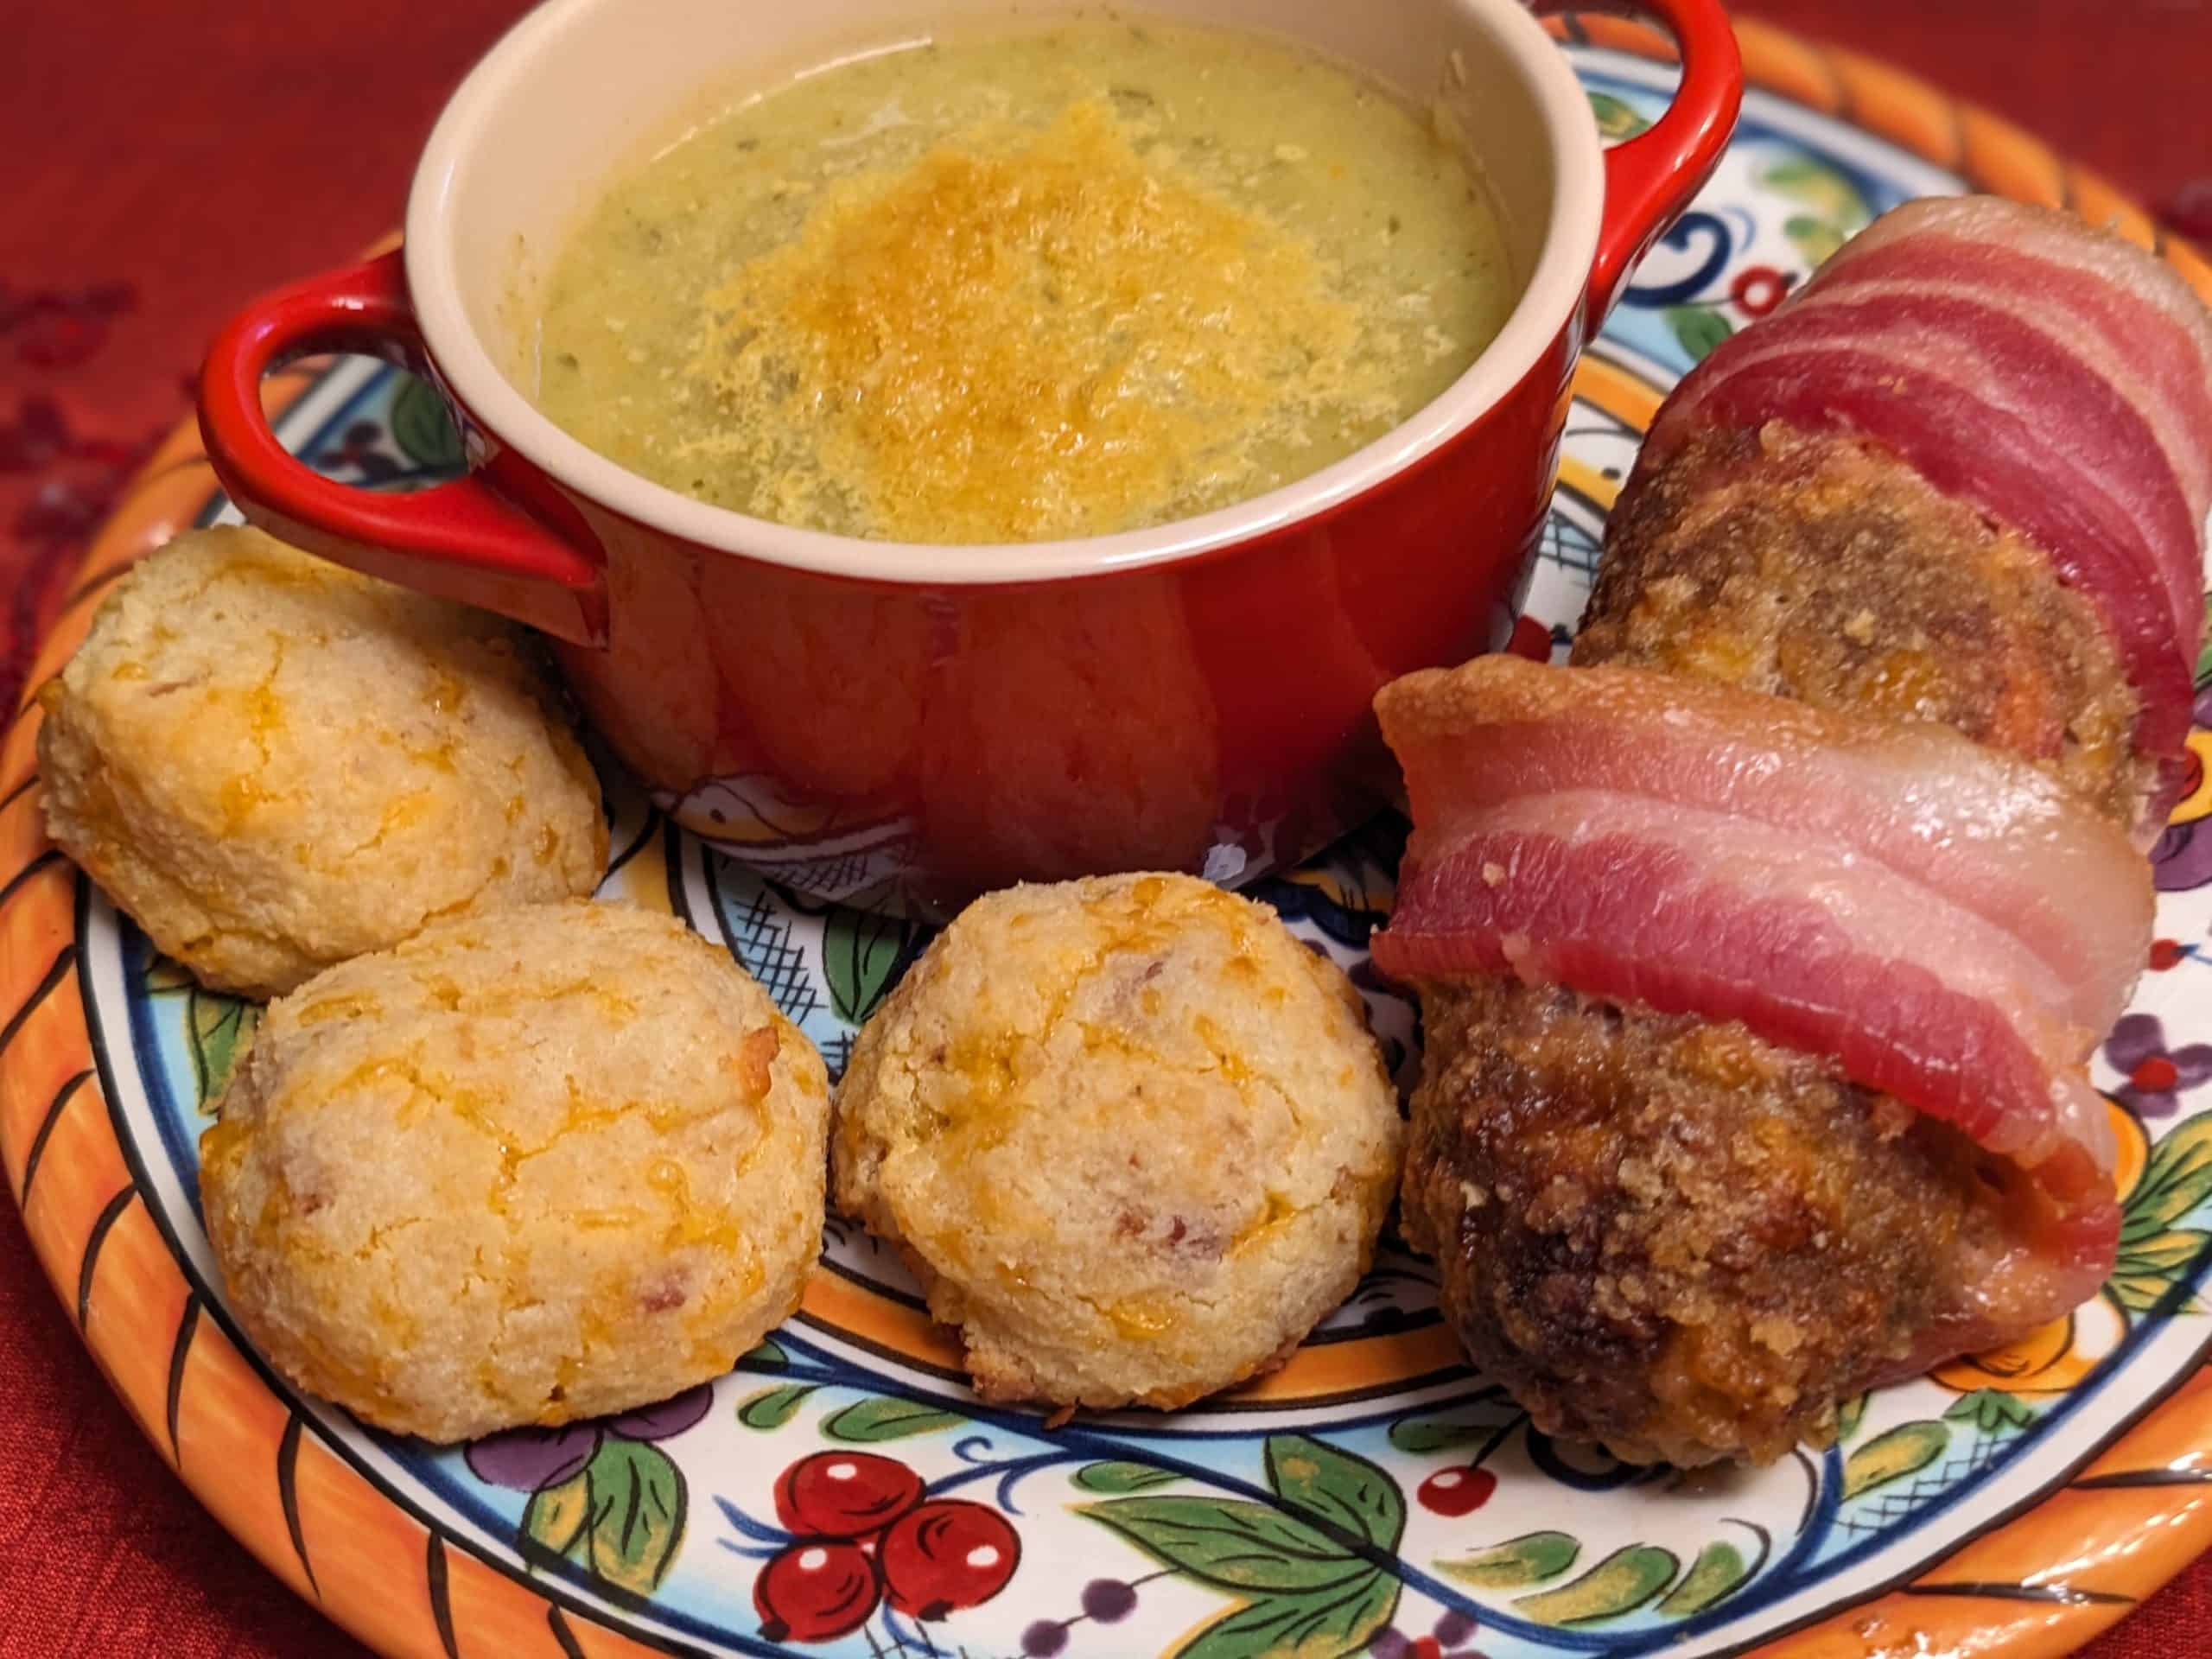 Fall Kickoff Dinner Party plate filled with Personal-Size Low Carb Bacon Cheddar Meatloaf, Bacon Cheddar Biscuits, and Leek and Cauliflower Soup